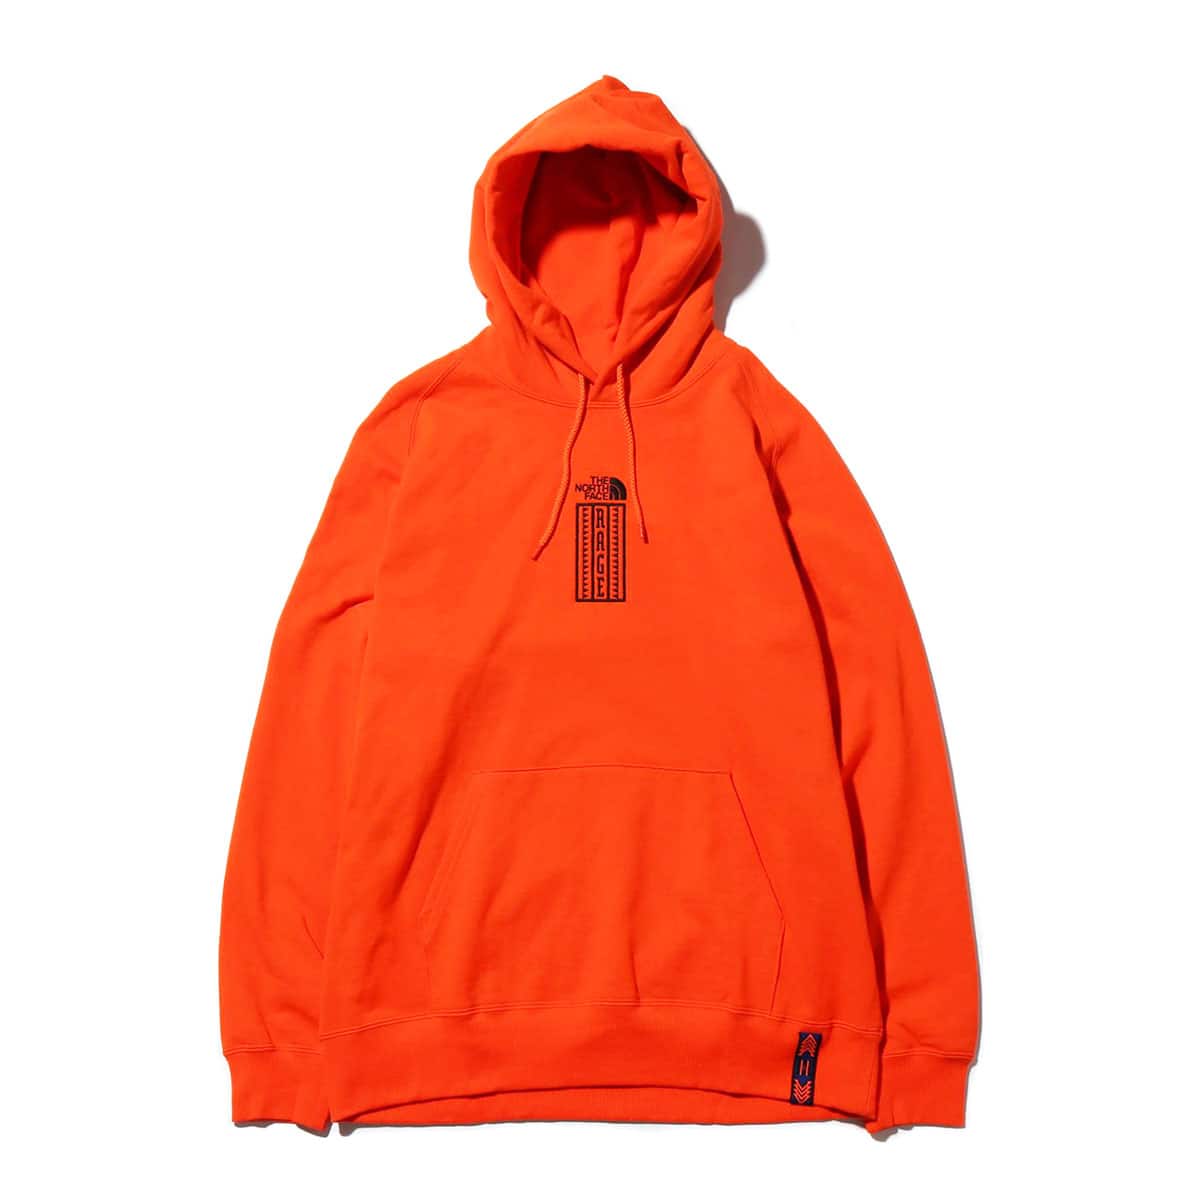 【THE NORTH FACE】RAGE SWEAT HOODIE